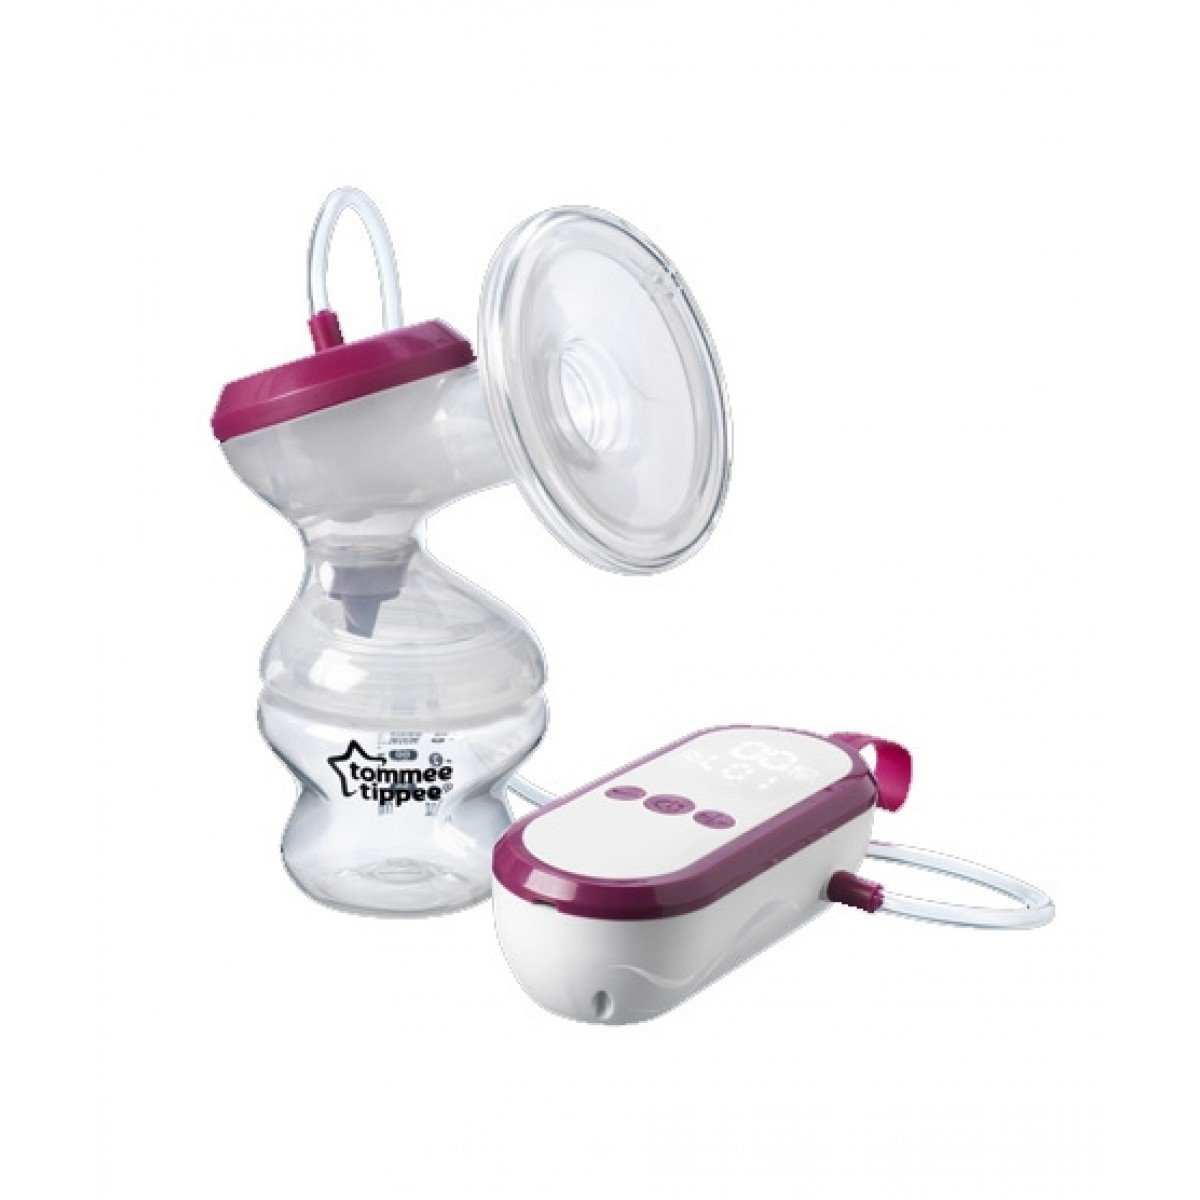 Tommee Tippee 1063 Electric Breast Pump Instructions Manual